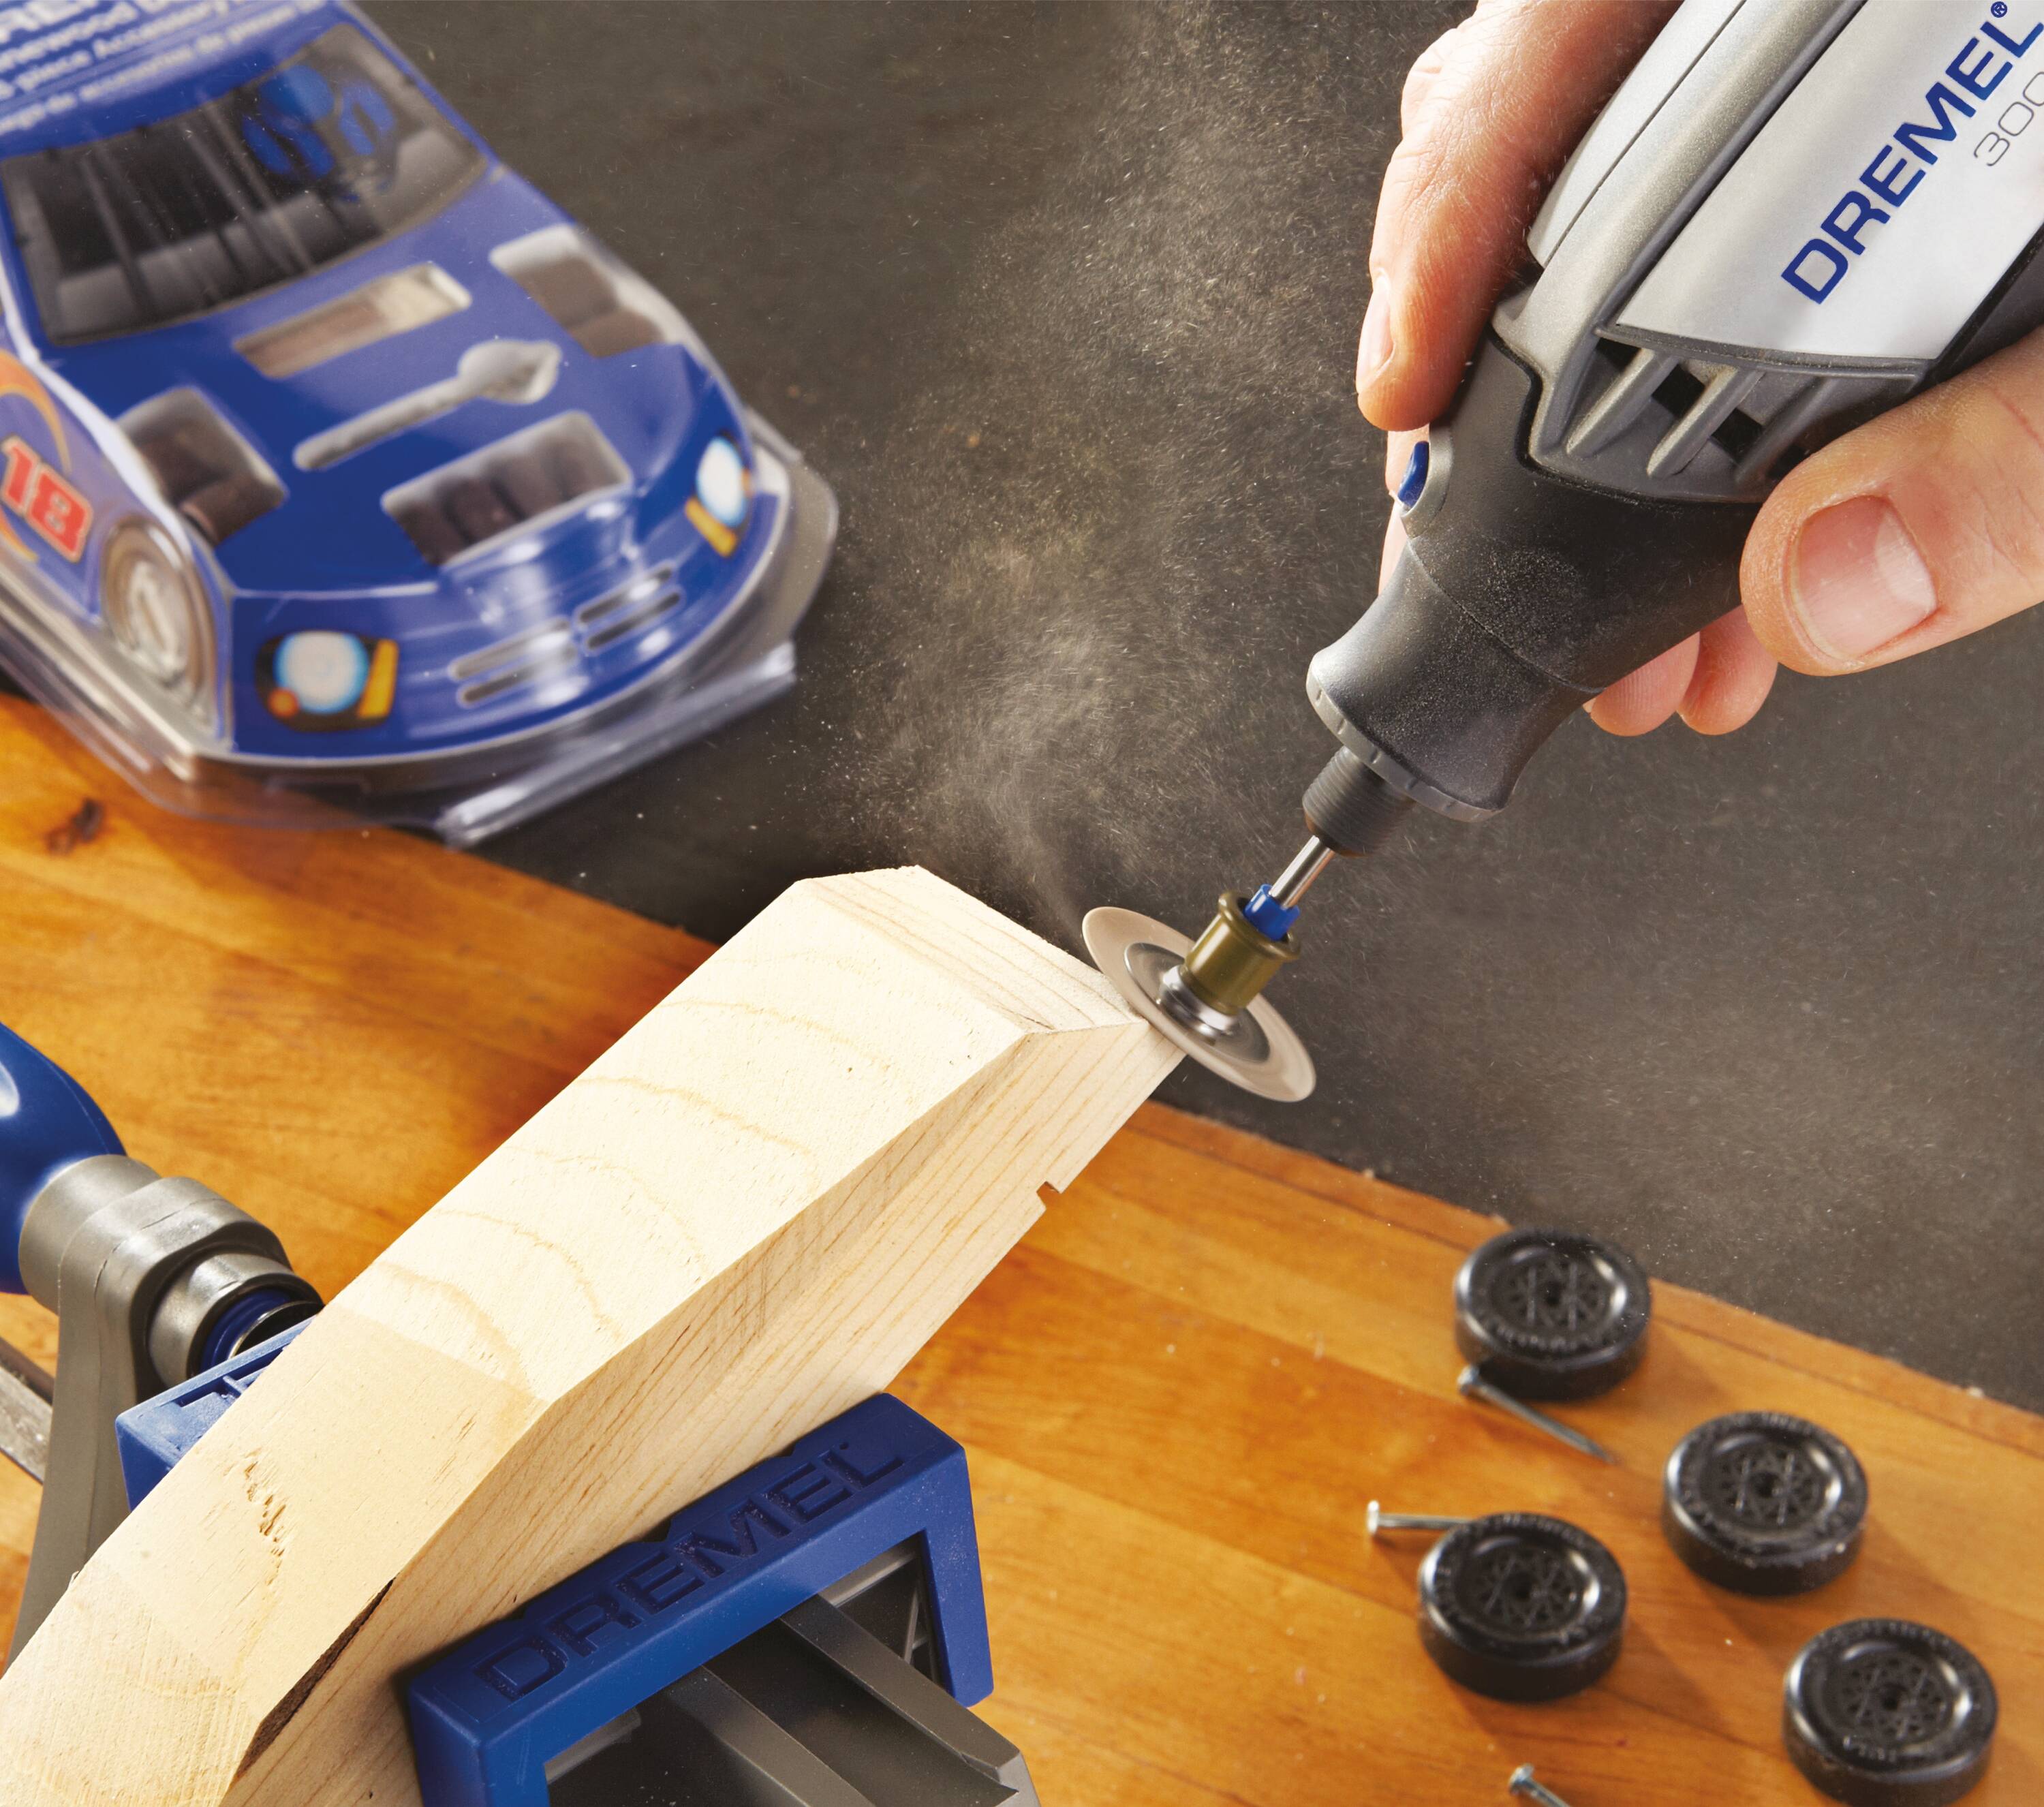 Dremel 710-08 All-Purpose Rotary Accessory Kit, 160-Piece : :  Tools & Home Improvement